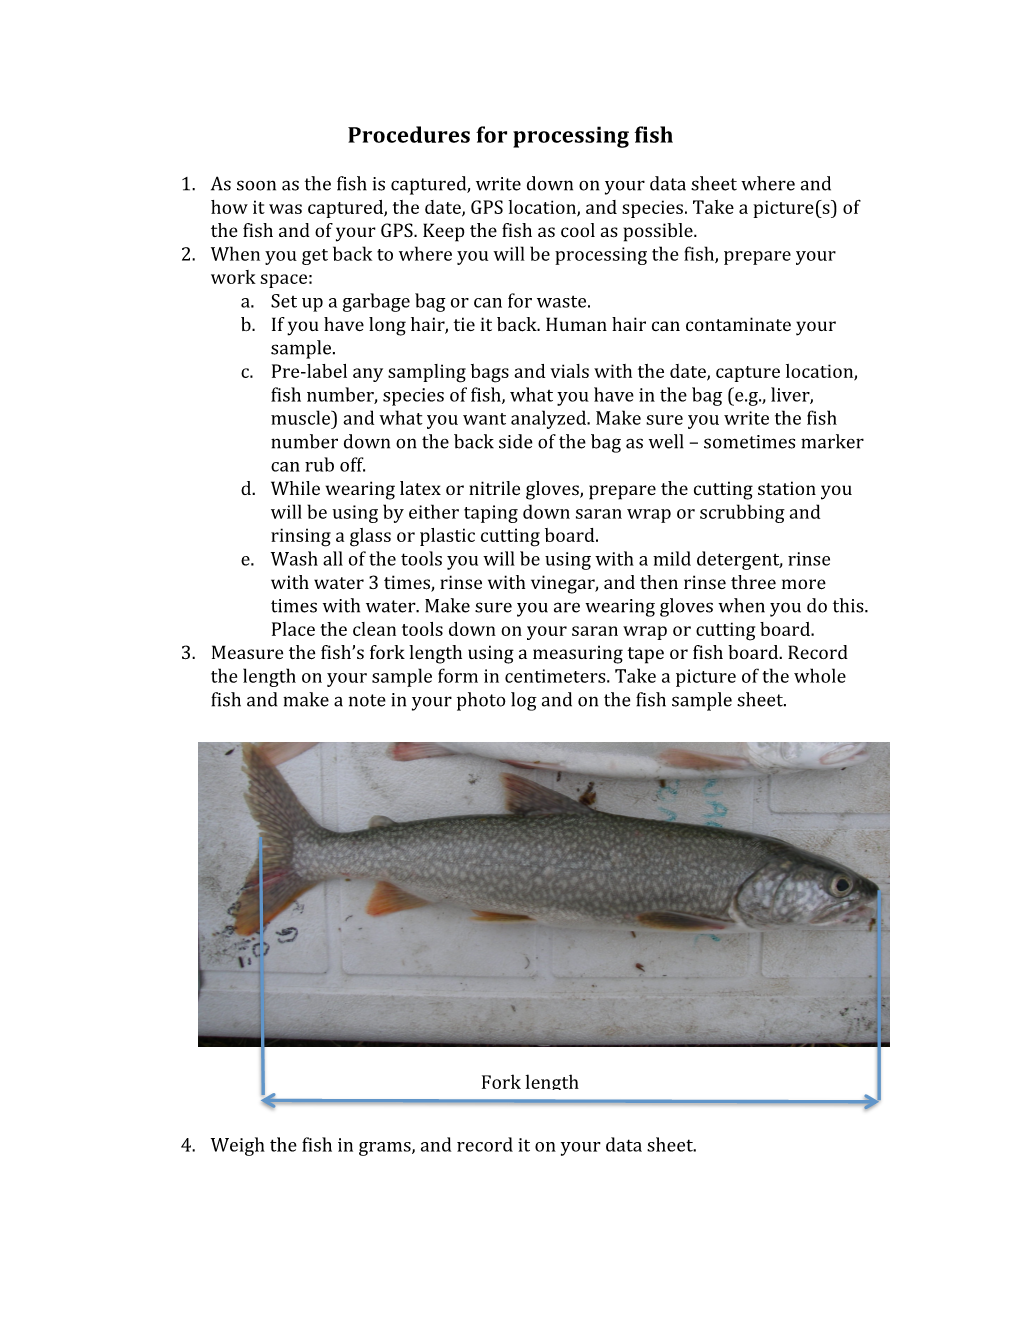 Procedures for Processing Fish